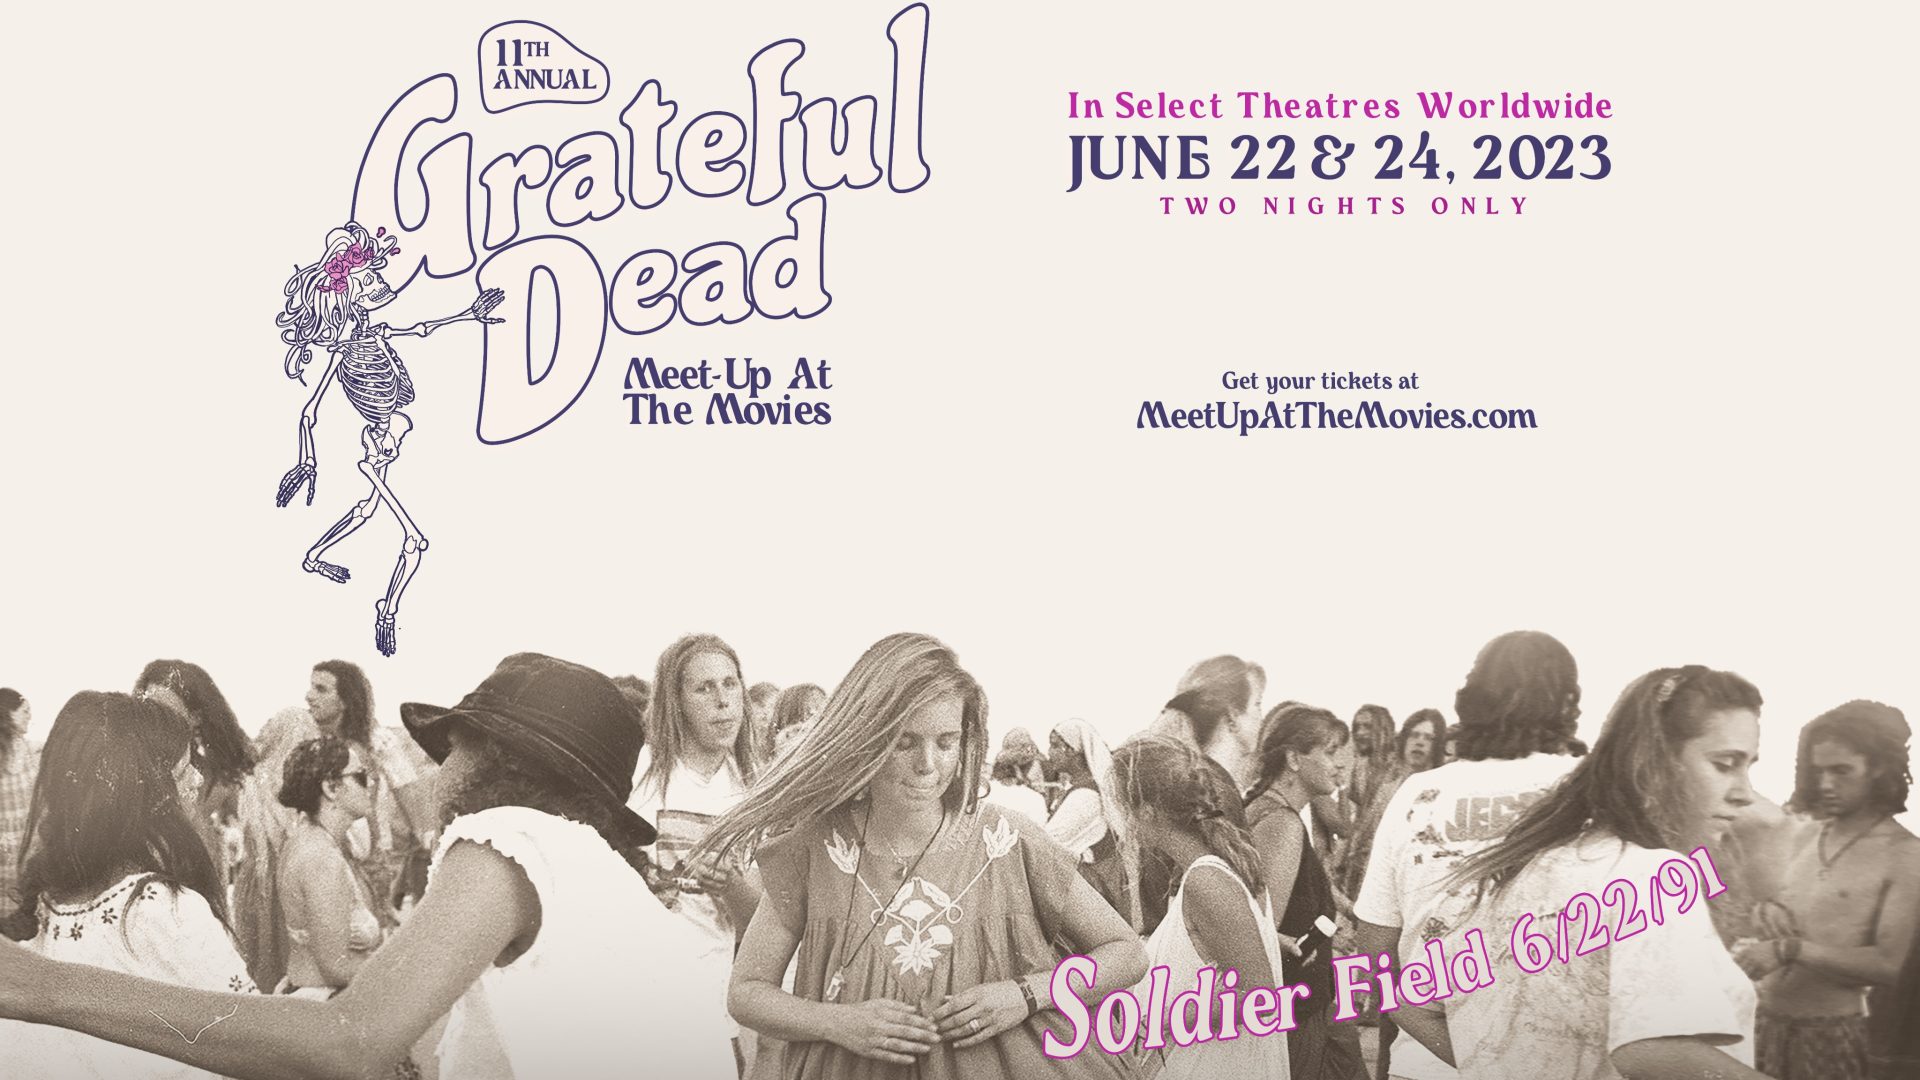 The Grateful Dead: Meet-Up At The Movies 2023